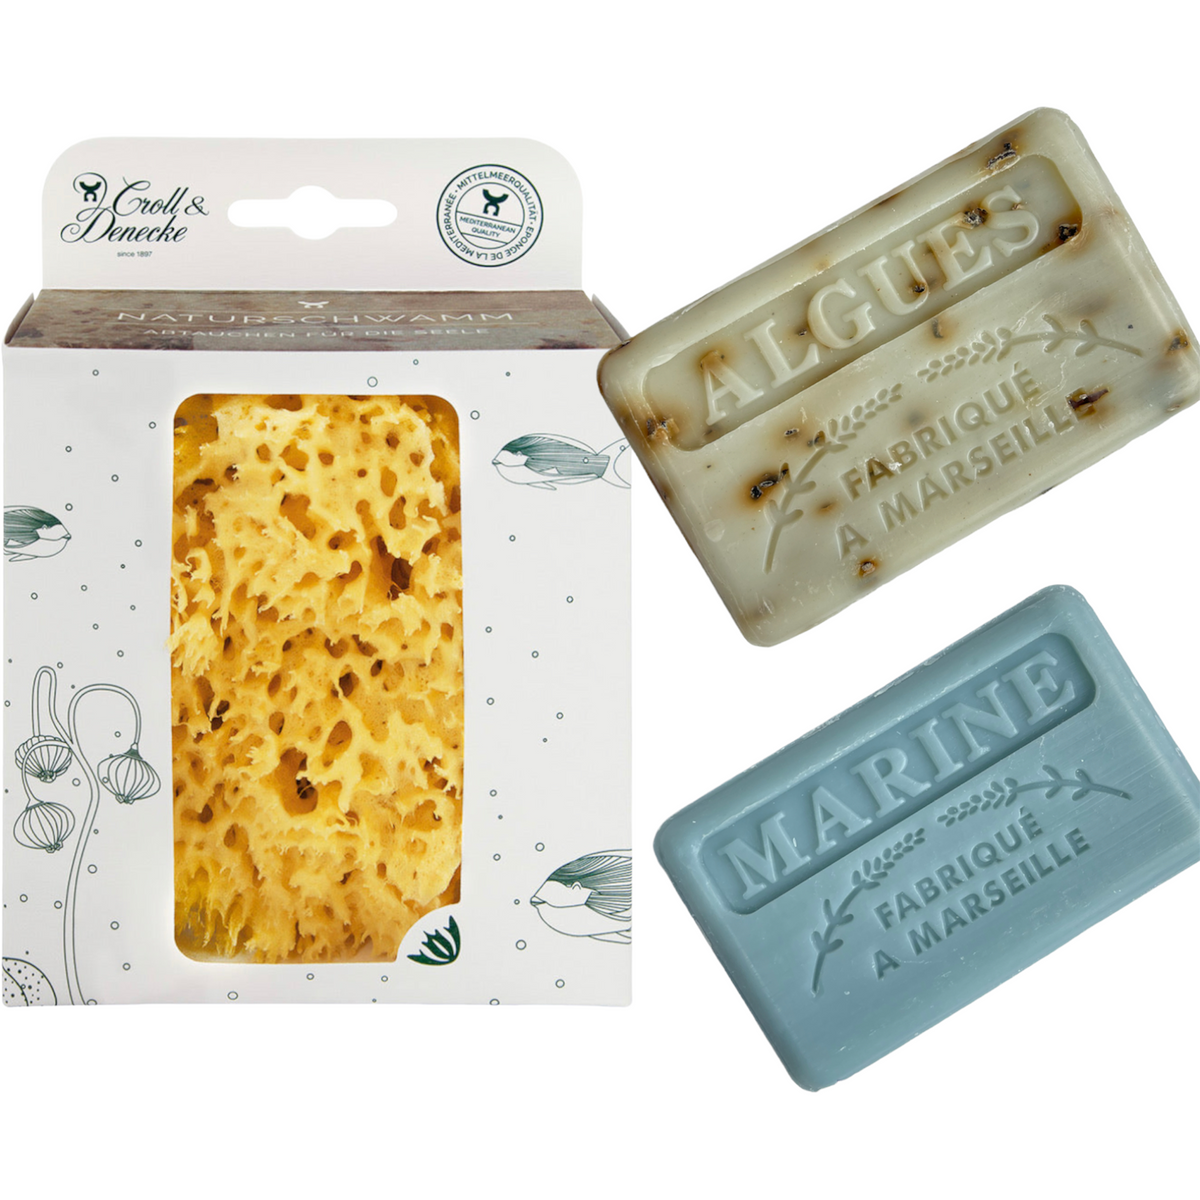 On the beach - Soap Gift Set